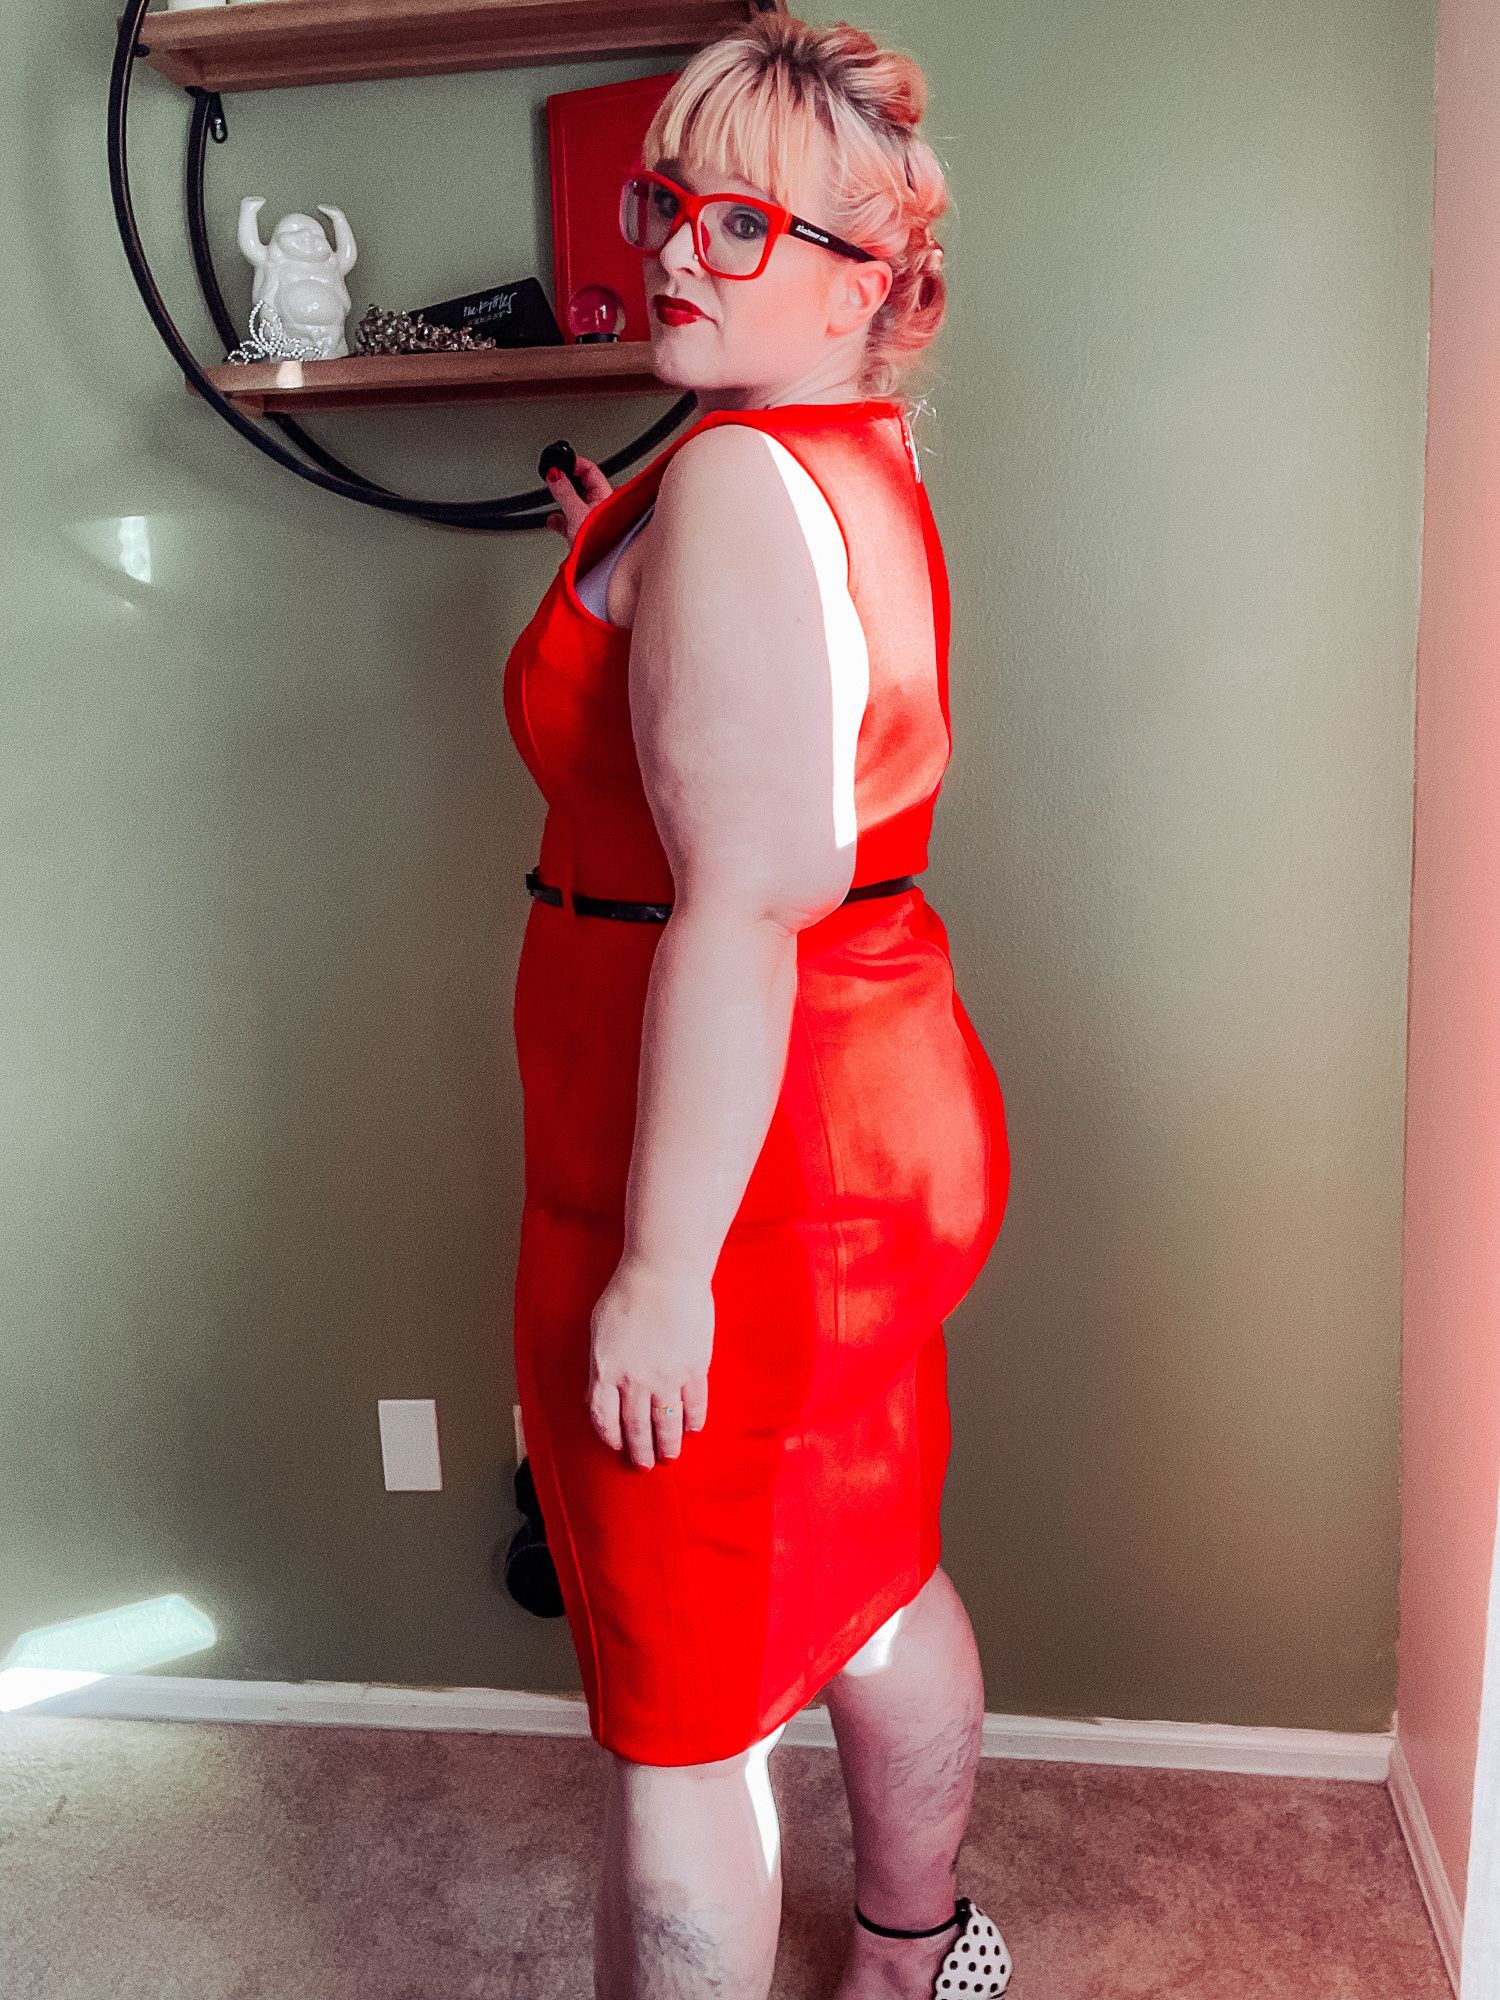 Red Dress and heels on your favorite BBW #10